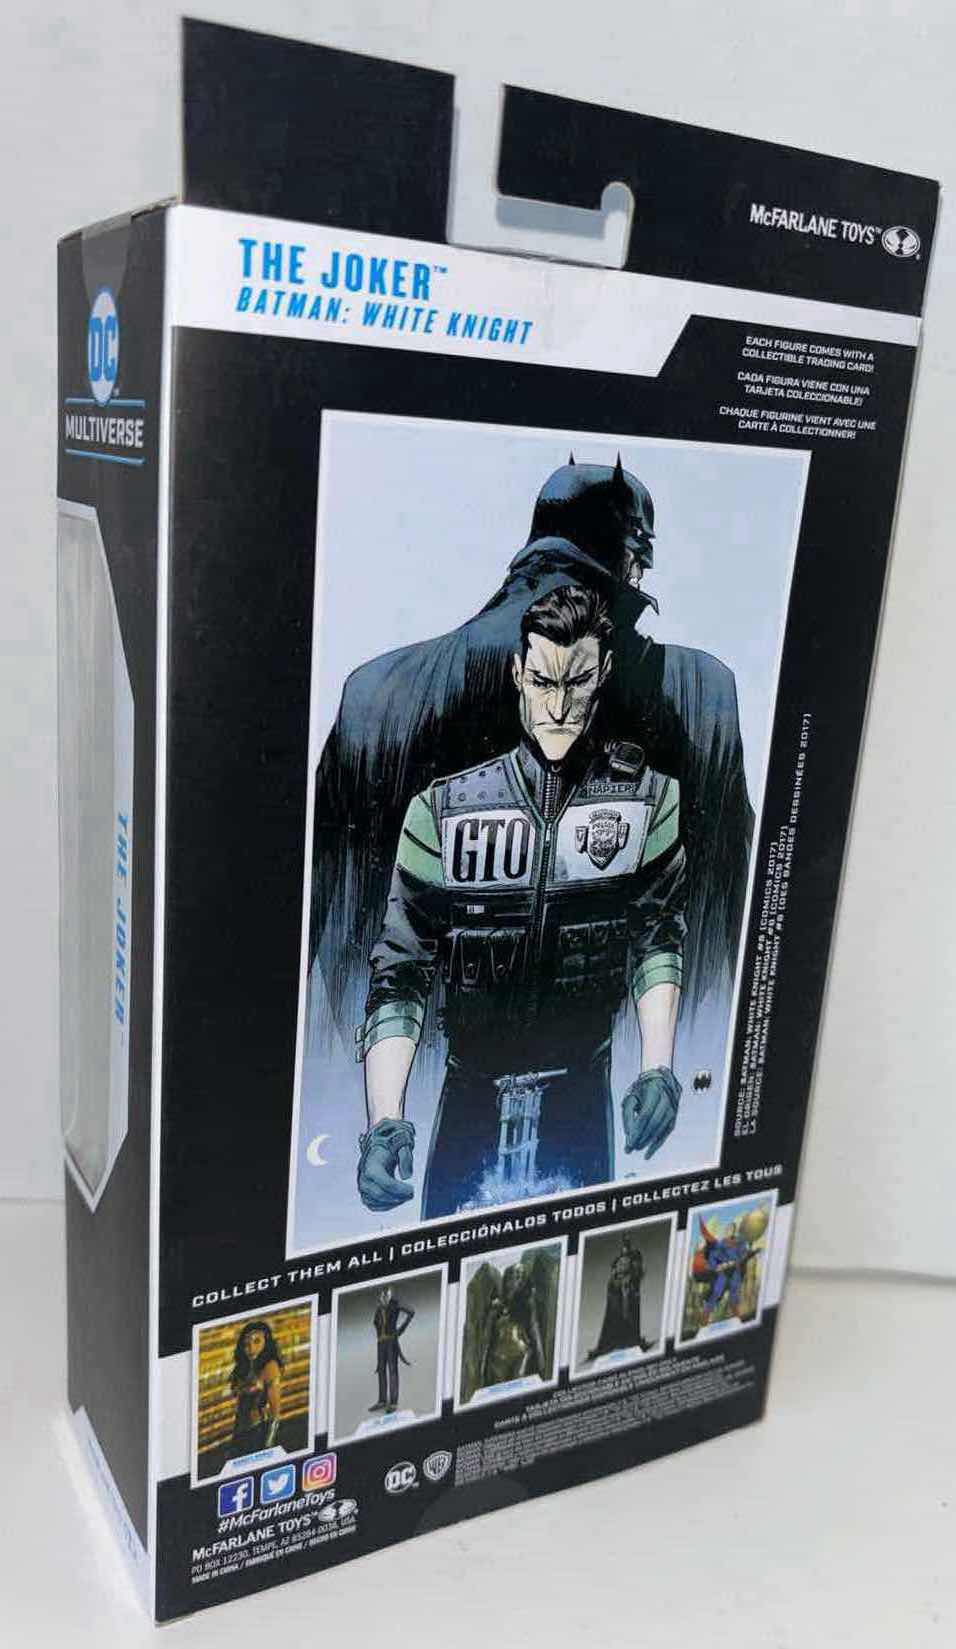 Photo 3 of NEW MCFARLANE TOYS DC MULTIVERSE ACTION FIGURE & ACCESSORIES, BATMAN: WHITE KNIGHT “THE JOKER” (1)